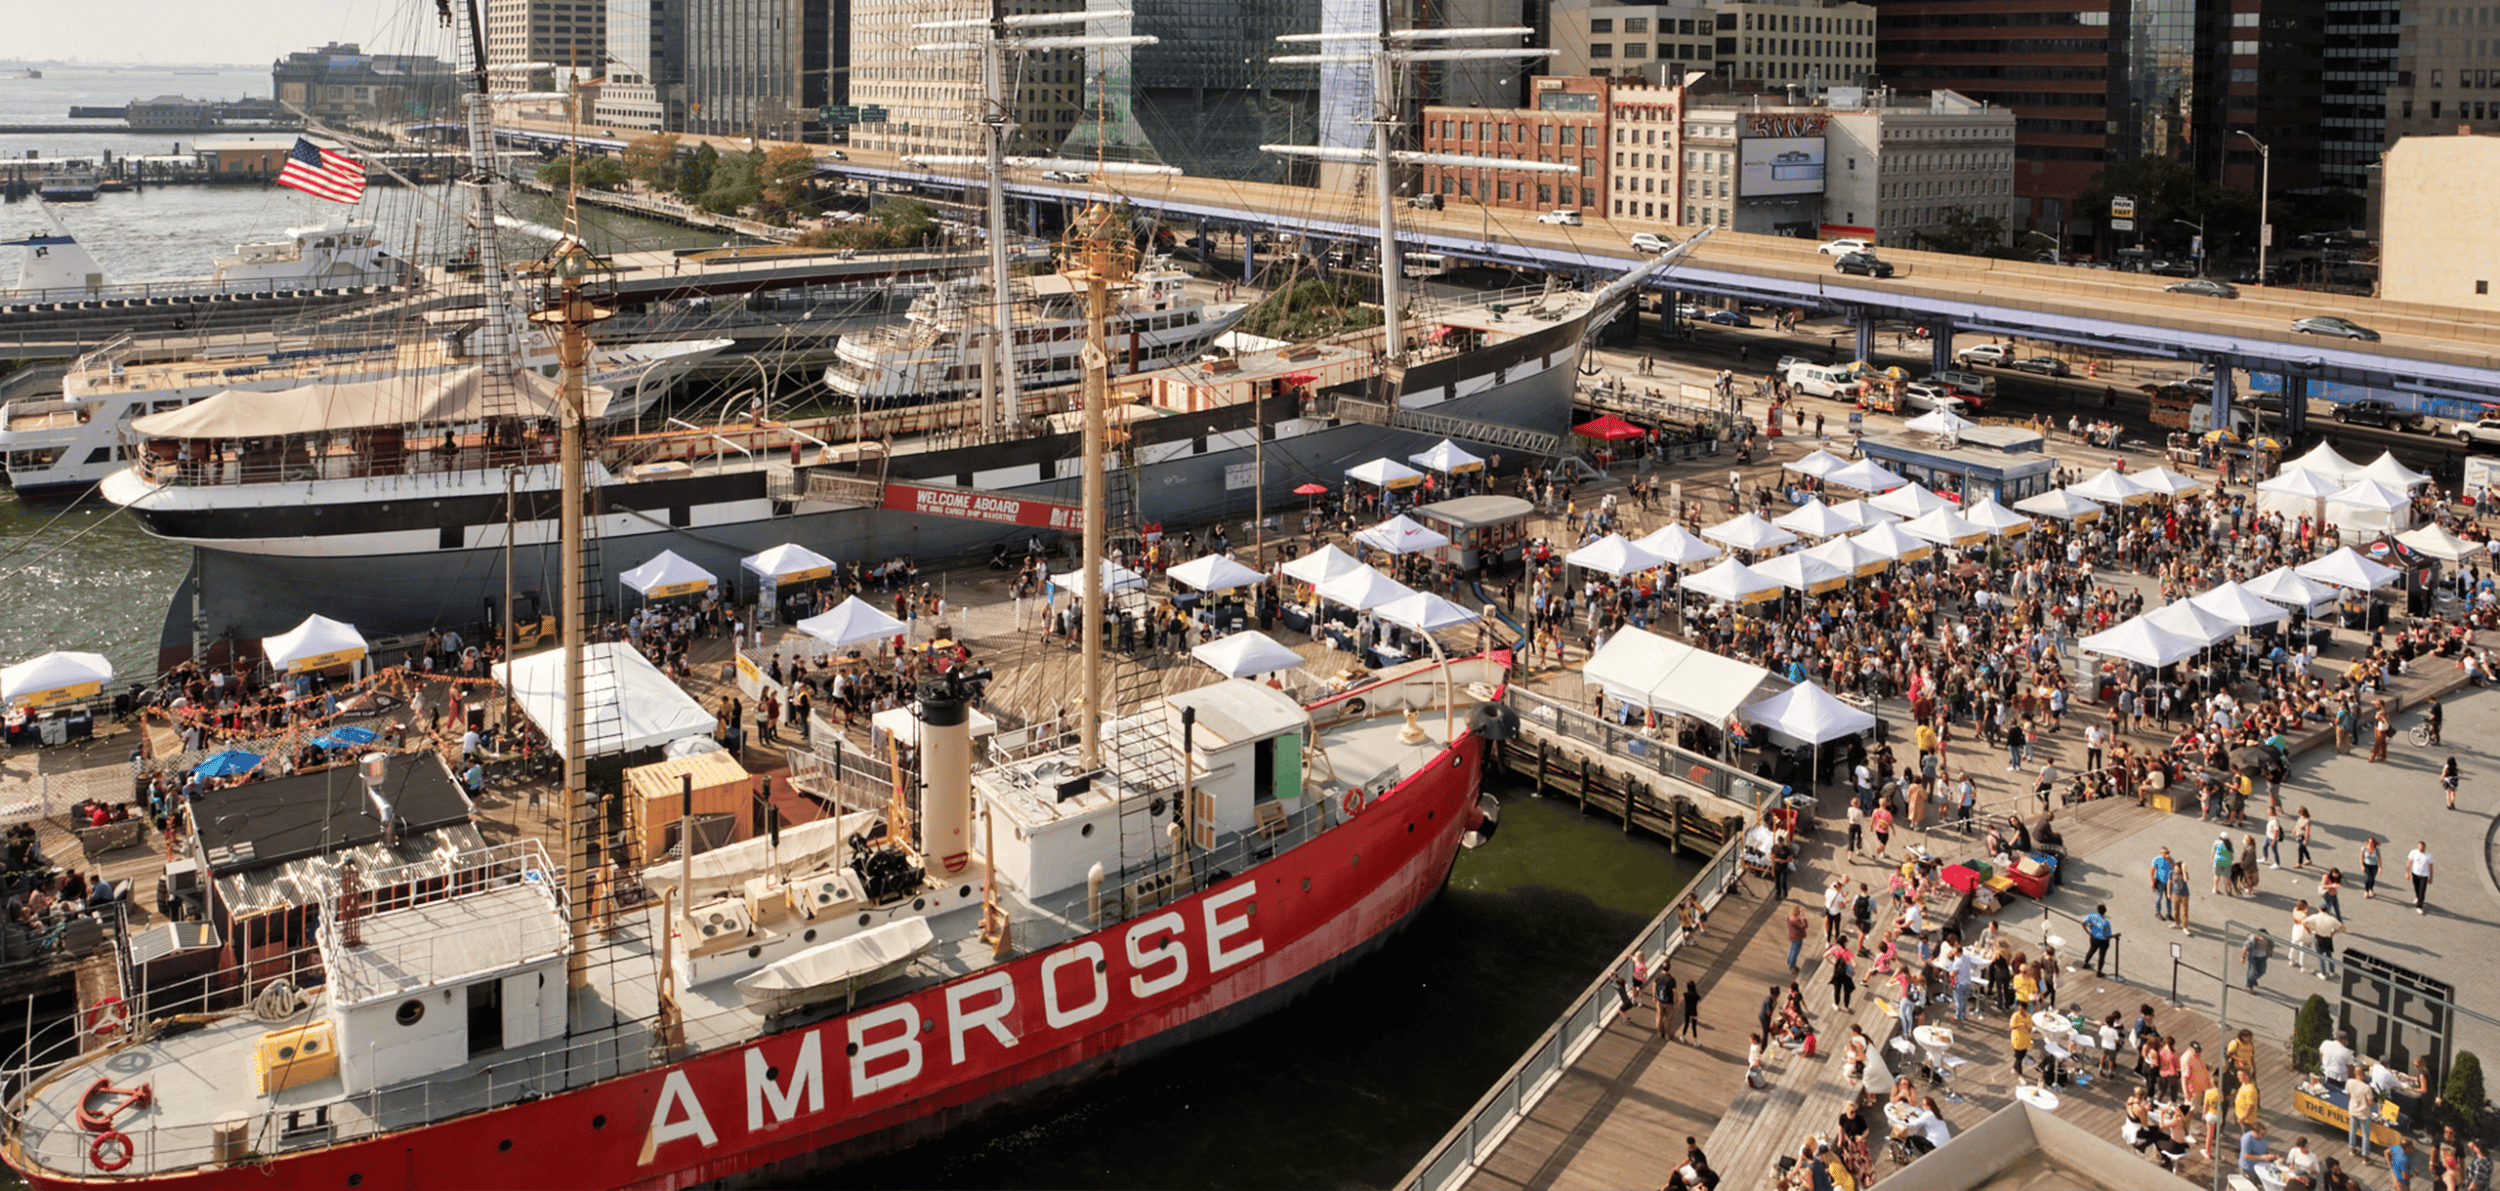 aerial of ship Ambrose and crowd at Taste of the Seaport event